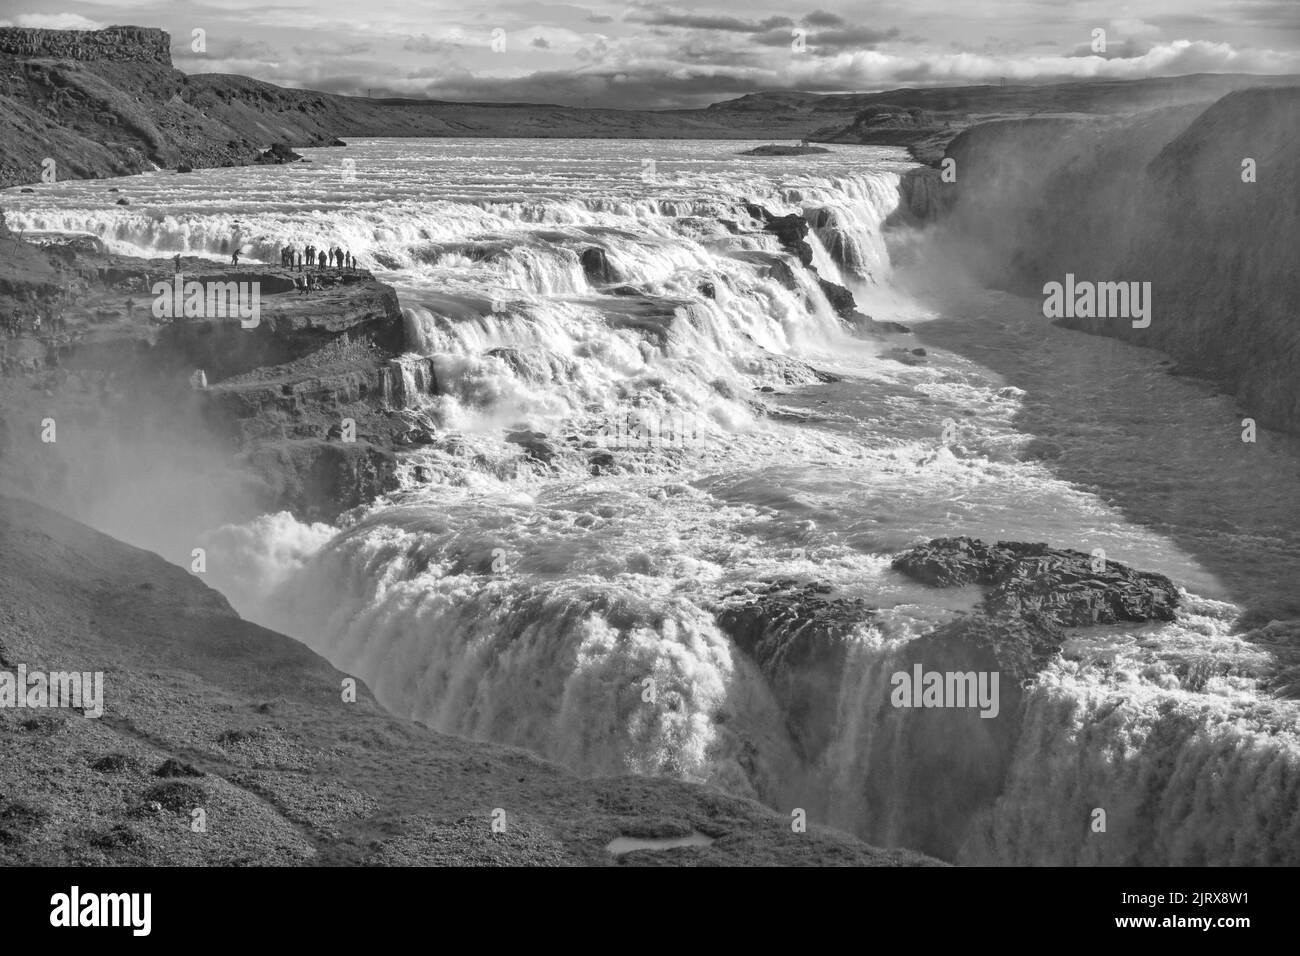 Gullfoss waterfall located in canyon on Hvita river, Iceland Stock Photo